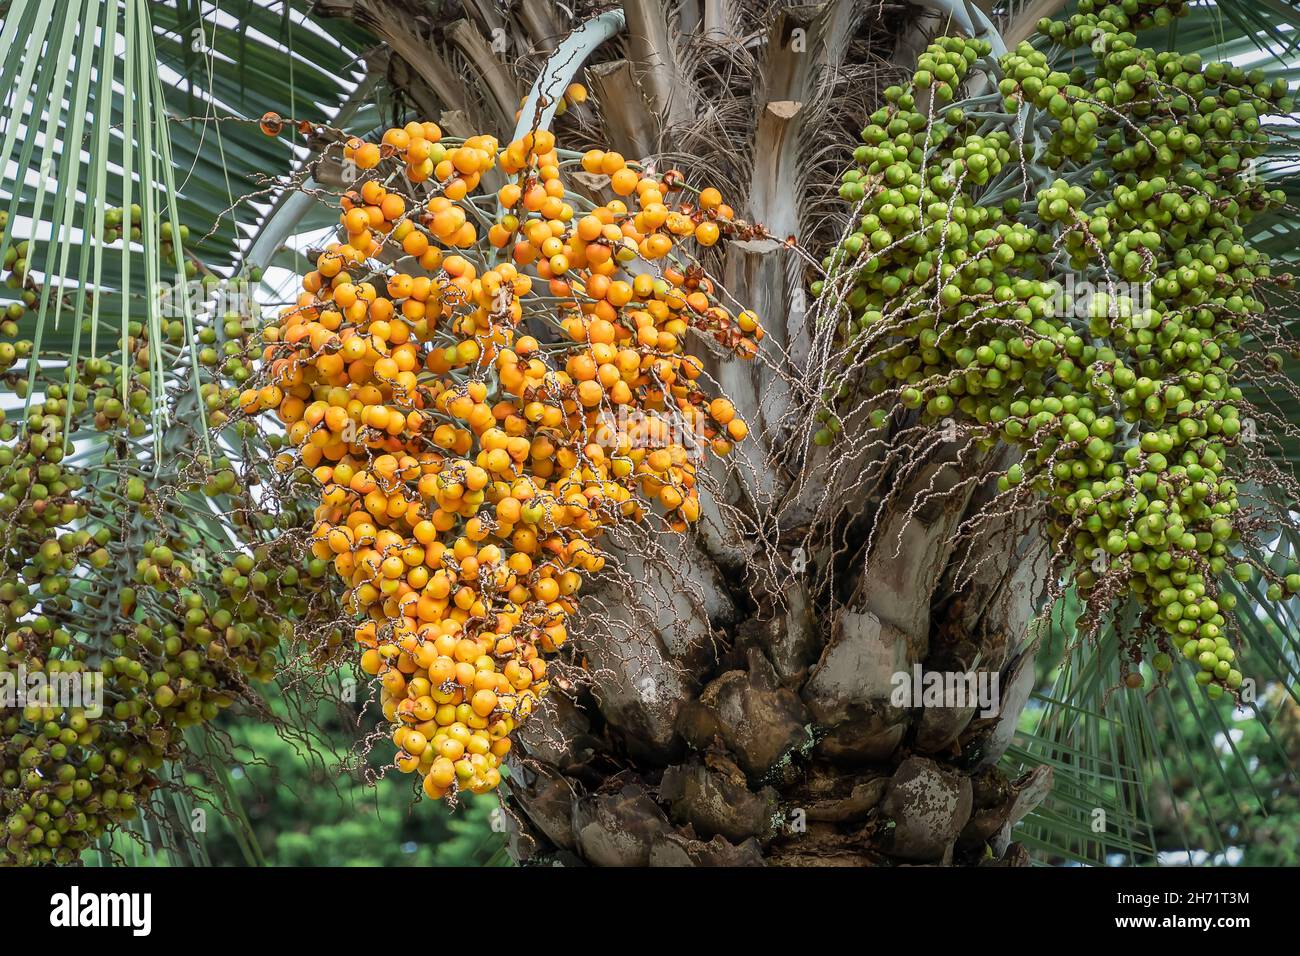 Close-up of yellow and green fruits of the Pindo jelly palm (butia capitata) hanging from a tree Stock Photo